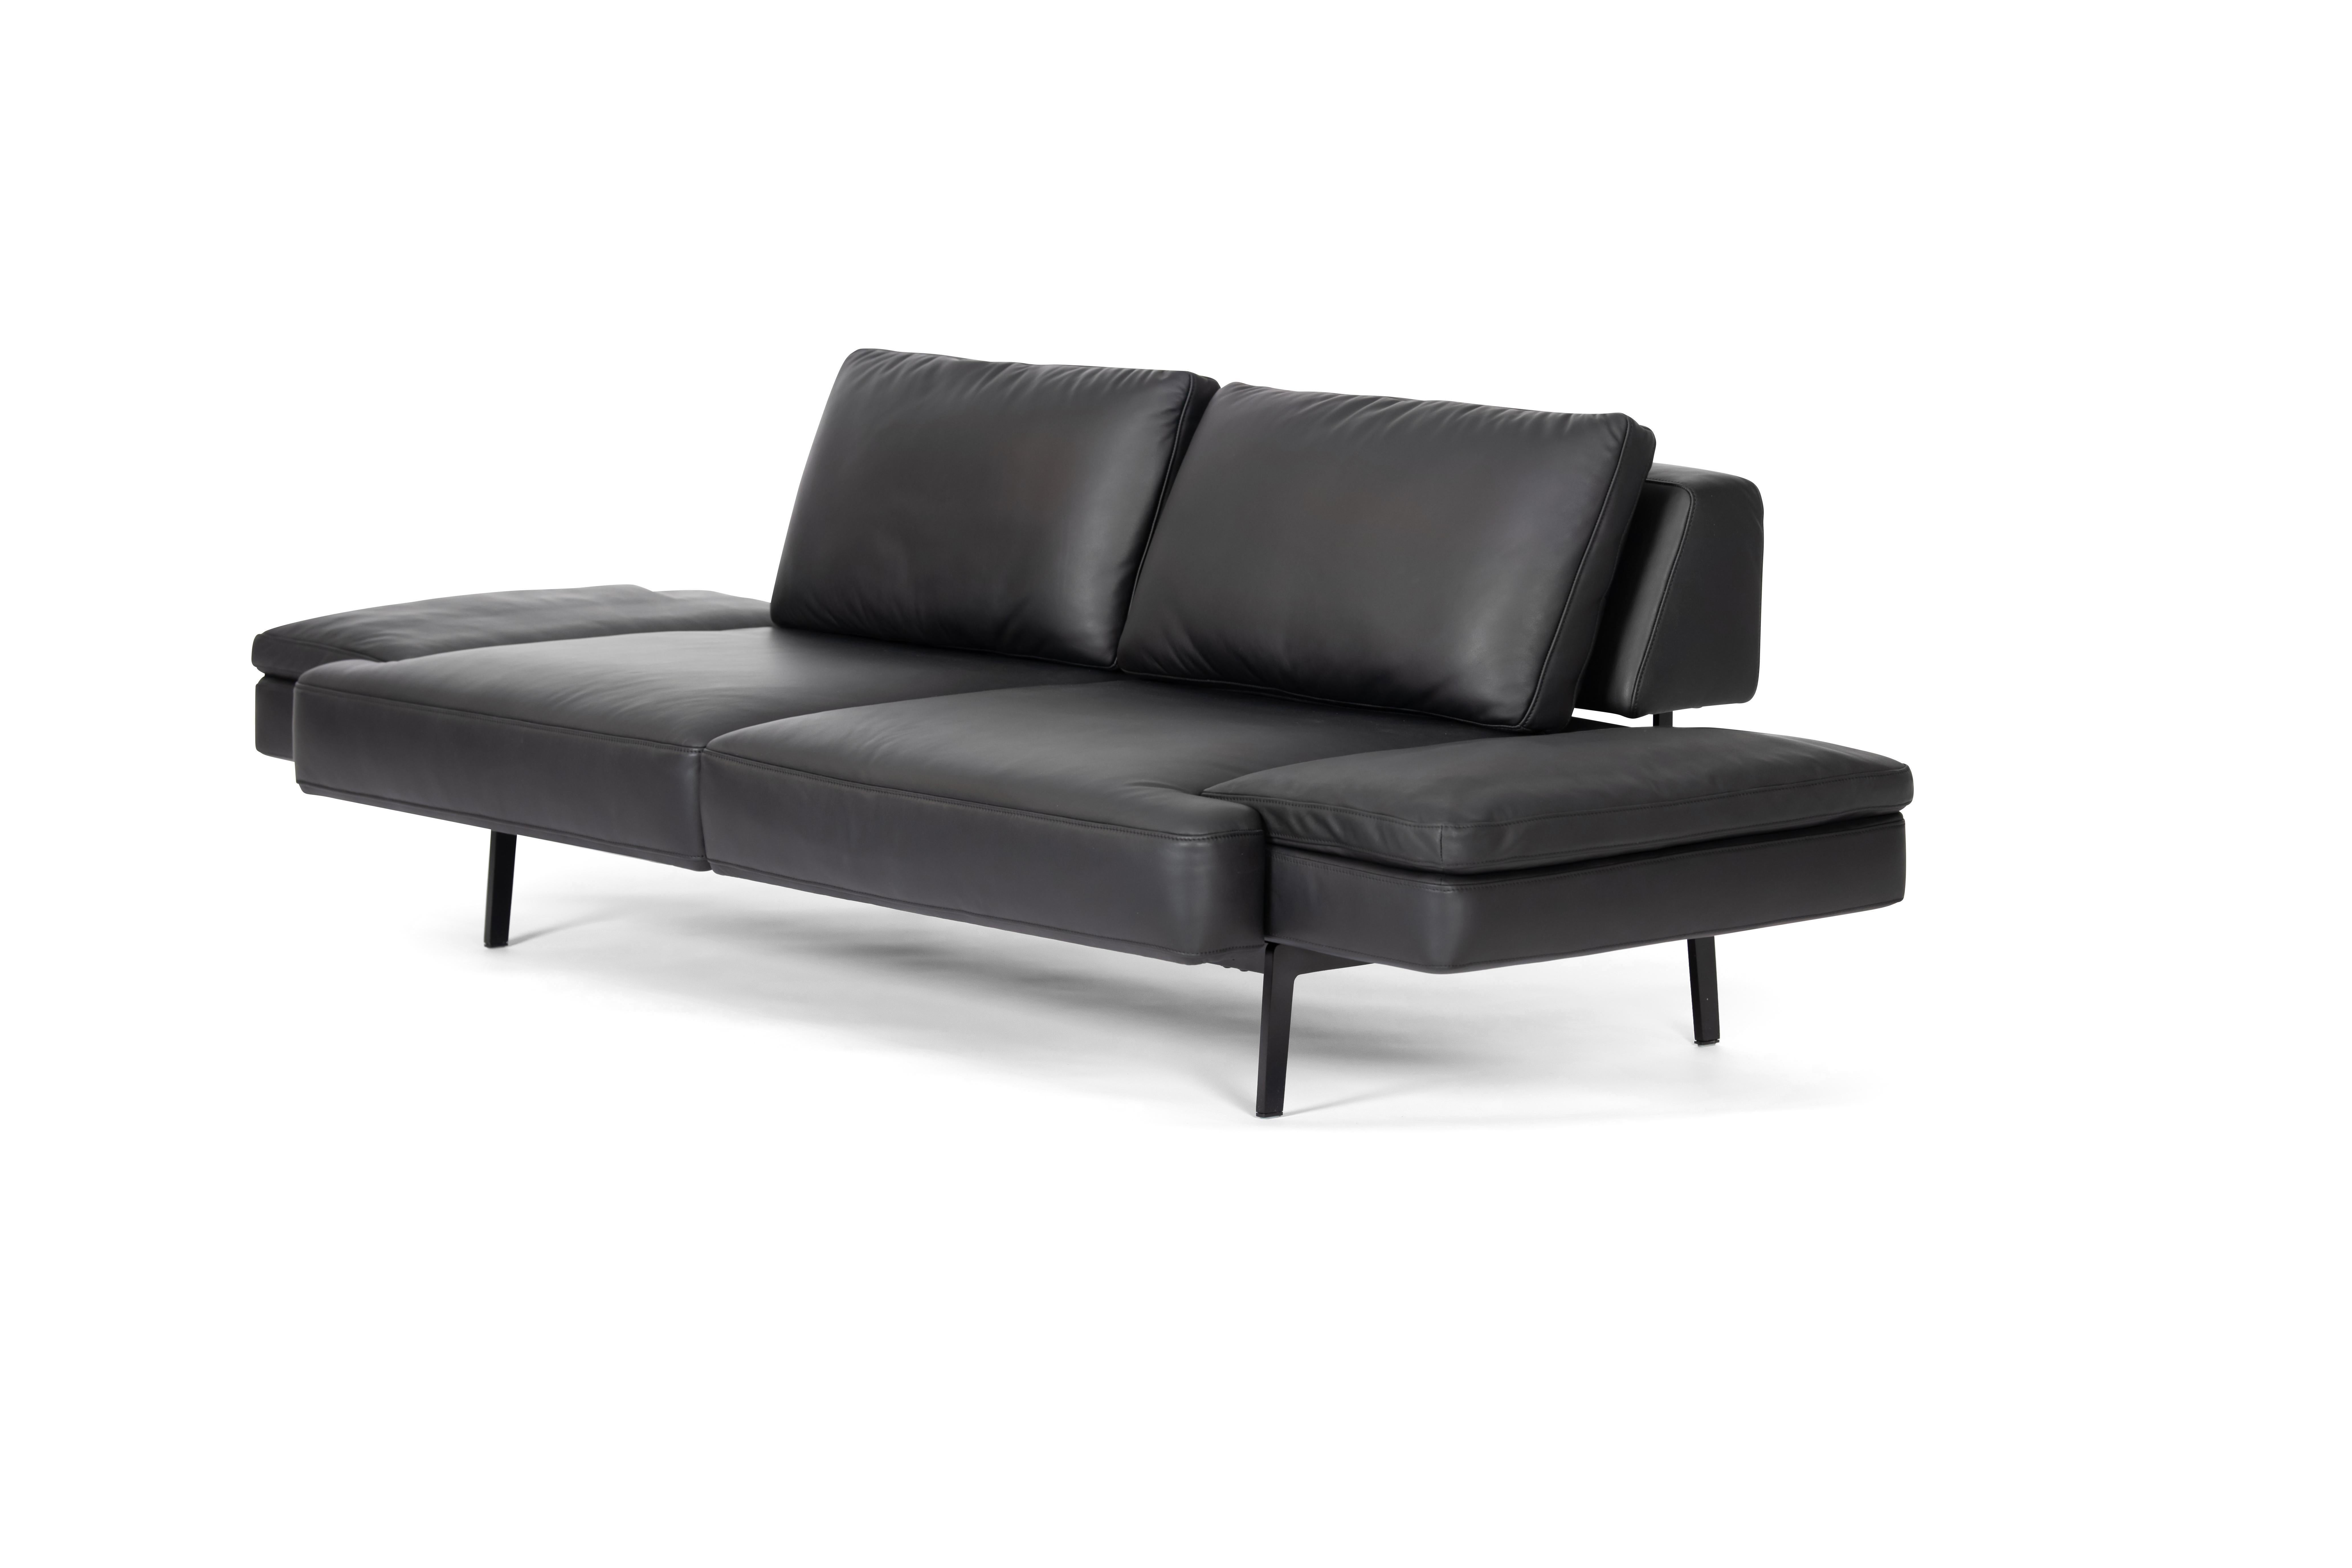 Swiss De Sede DS-747/23 Multifunctional Sofa in Black Leather Seat and Back Upholstery For Sale